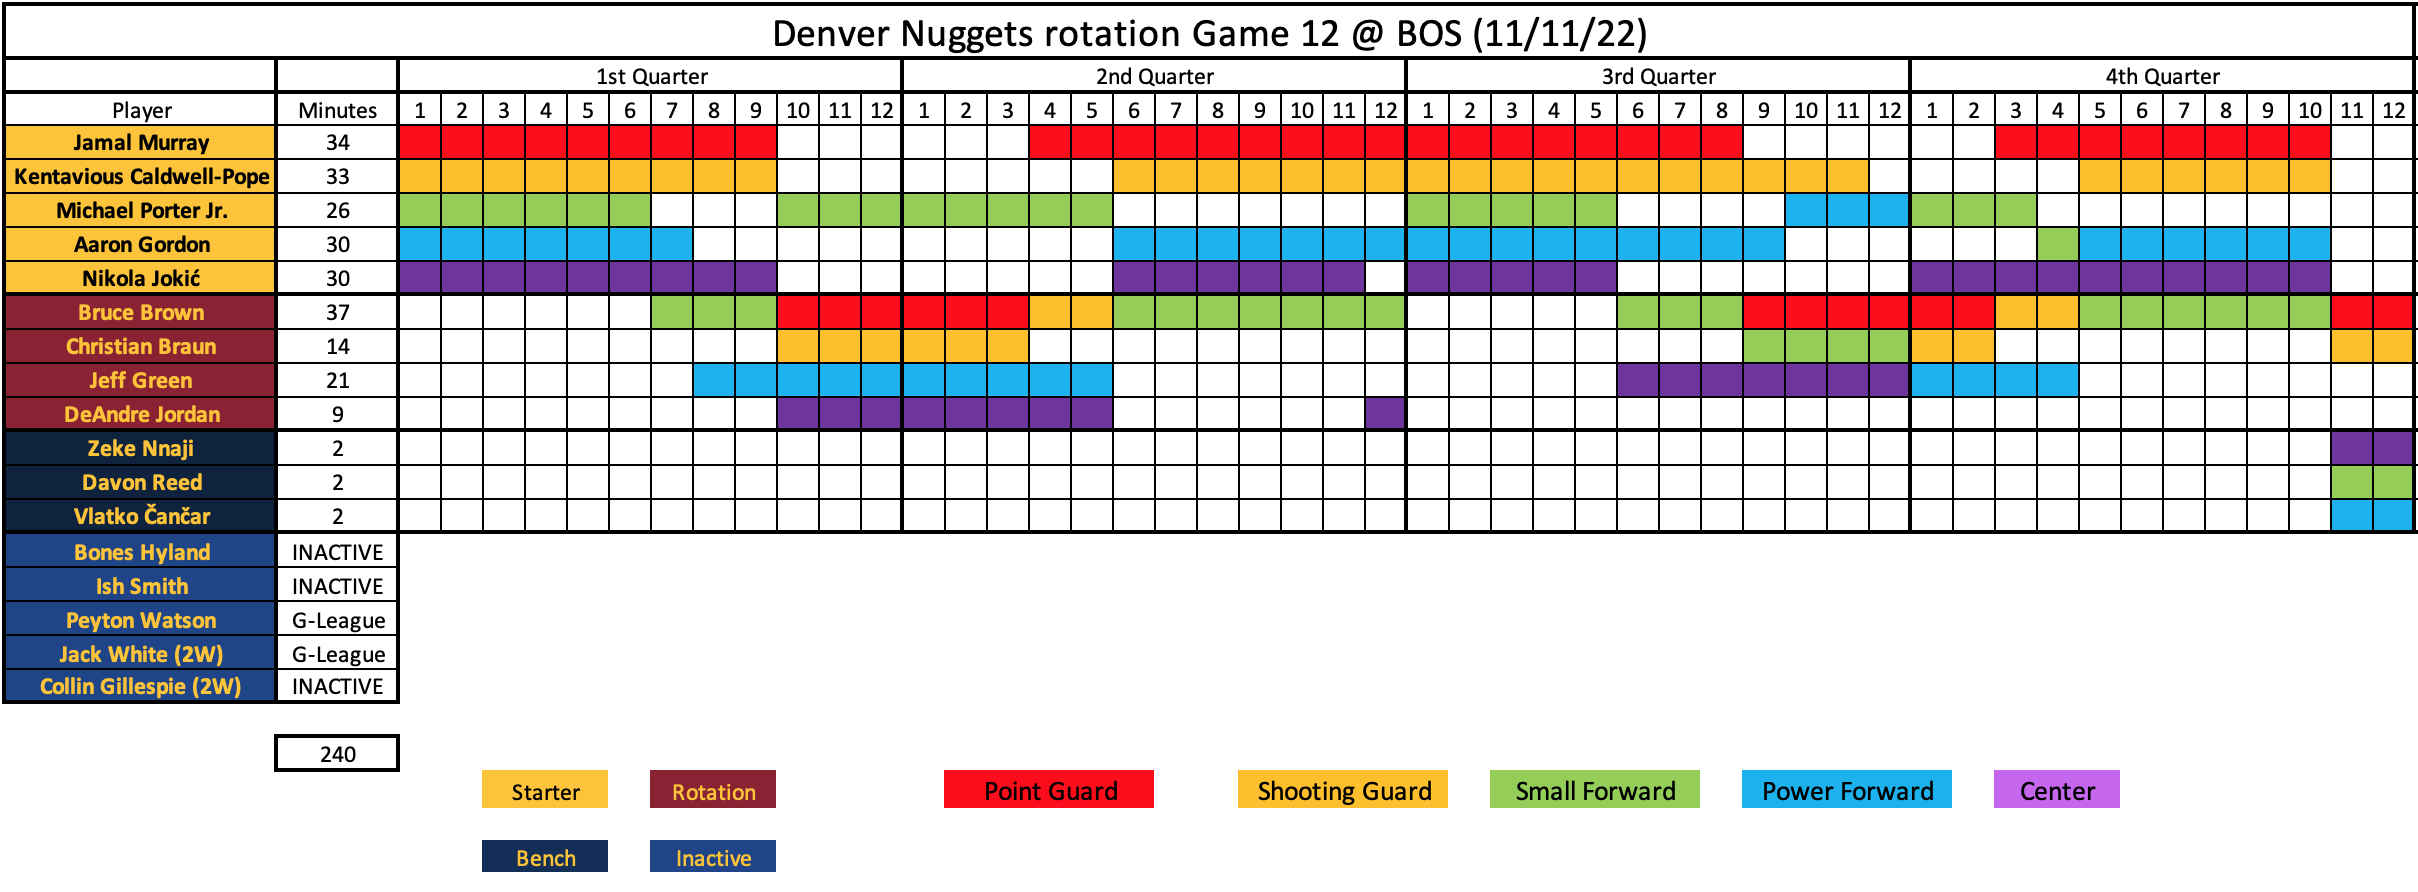 Ejection, dejection for Nuggets – The Denver Post